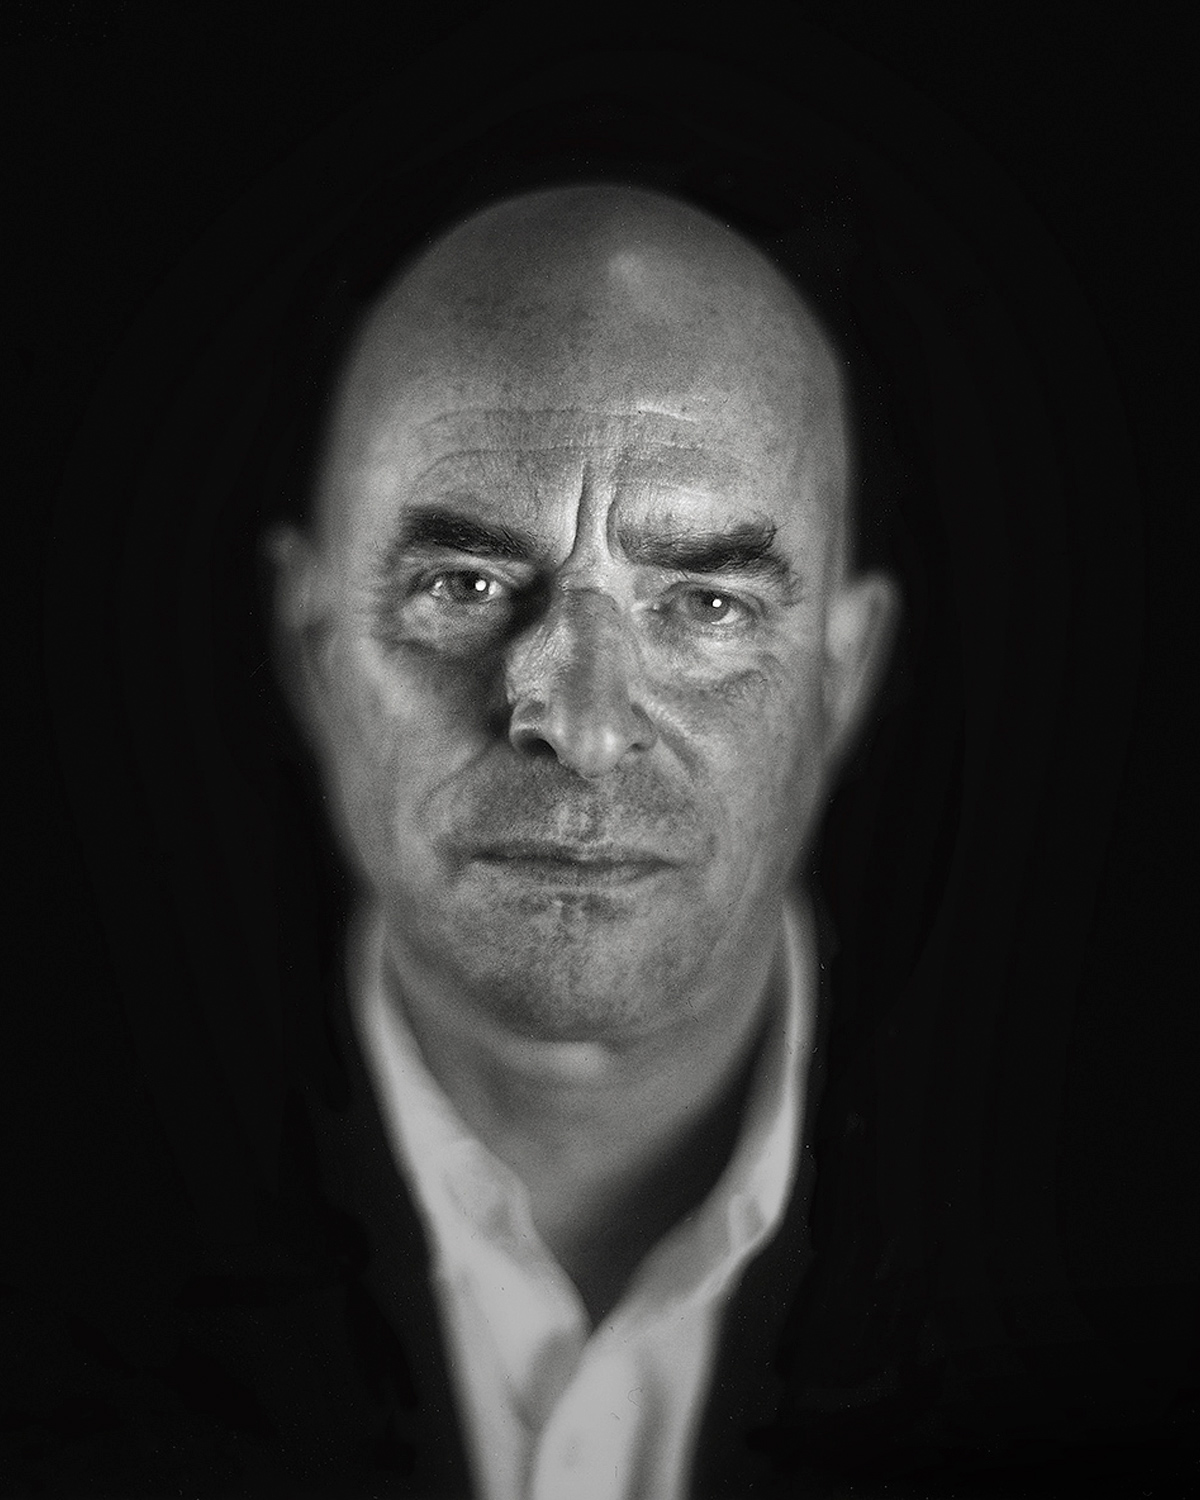 Dramatic Black and White 4×5 Portraits by Andy Lee